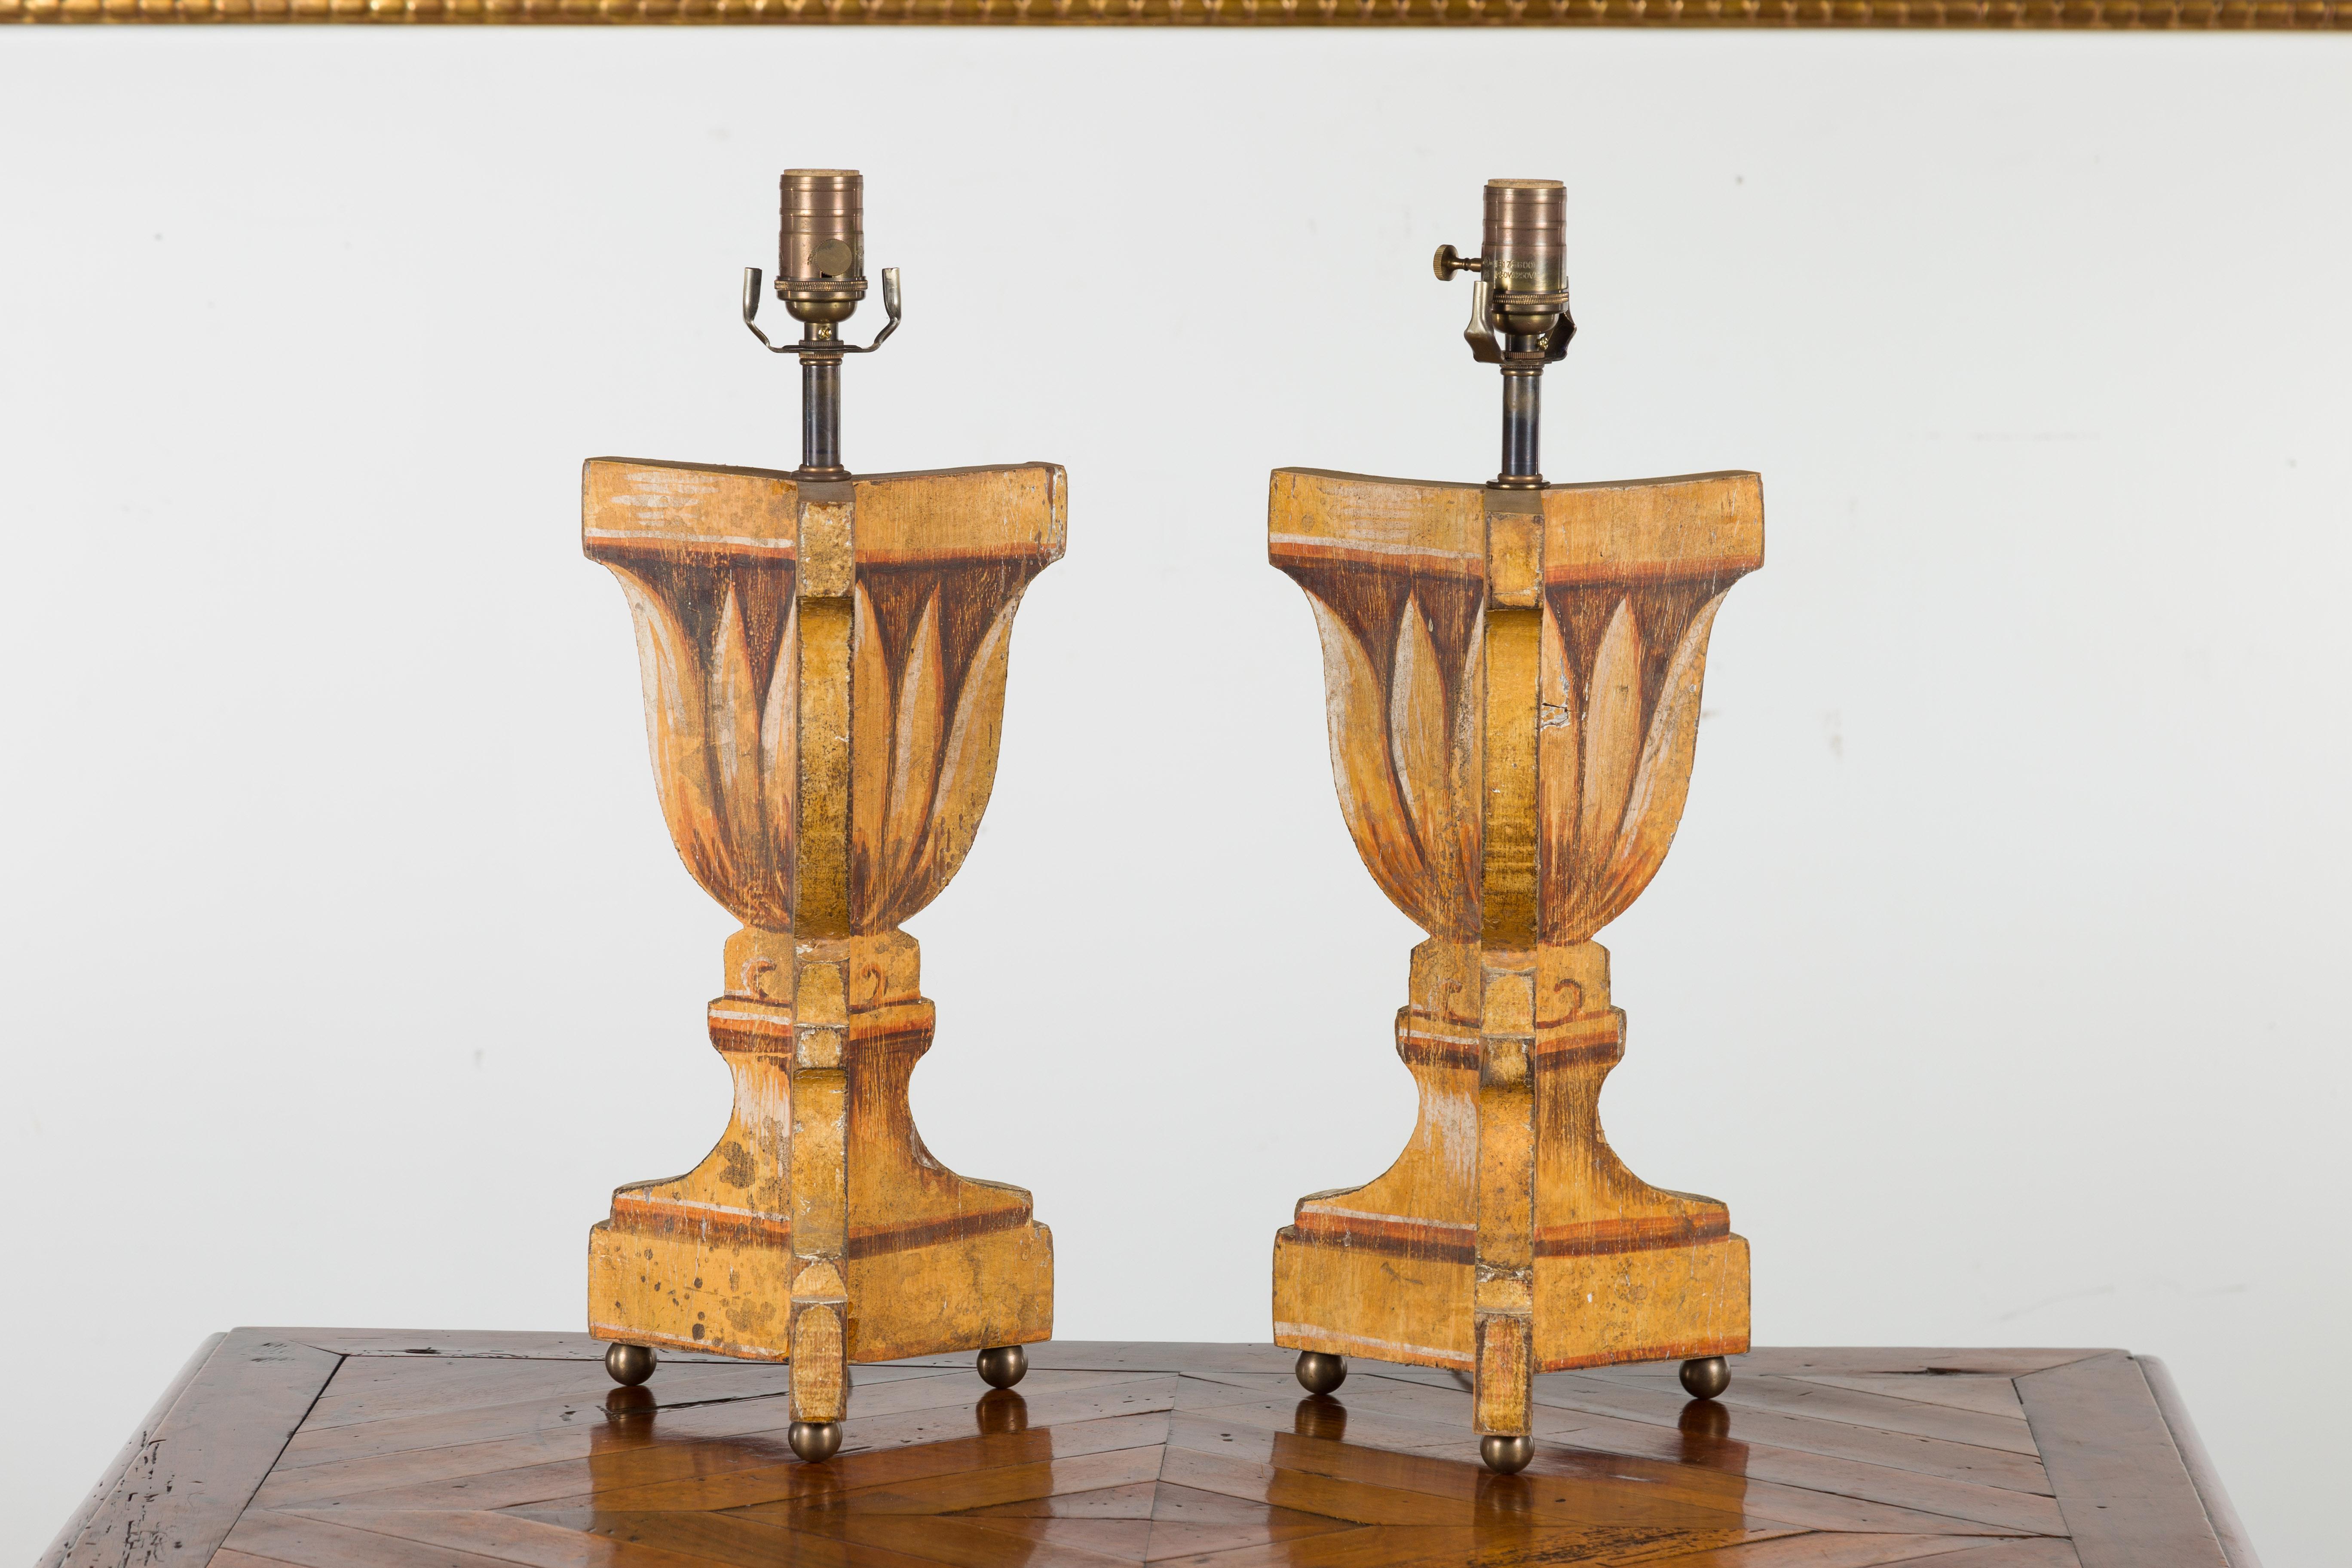 A pair of Italian vintage painted and carved table lamps from the mid-20th century, with stylized foliage decor and petite ball feet. Created in Italy during the midcentury period, each of this pair of table lamps features a painted decor depicting